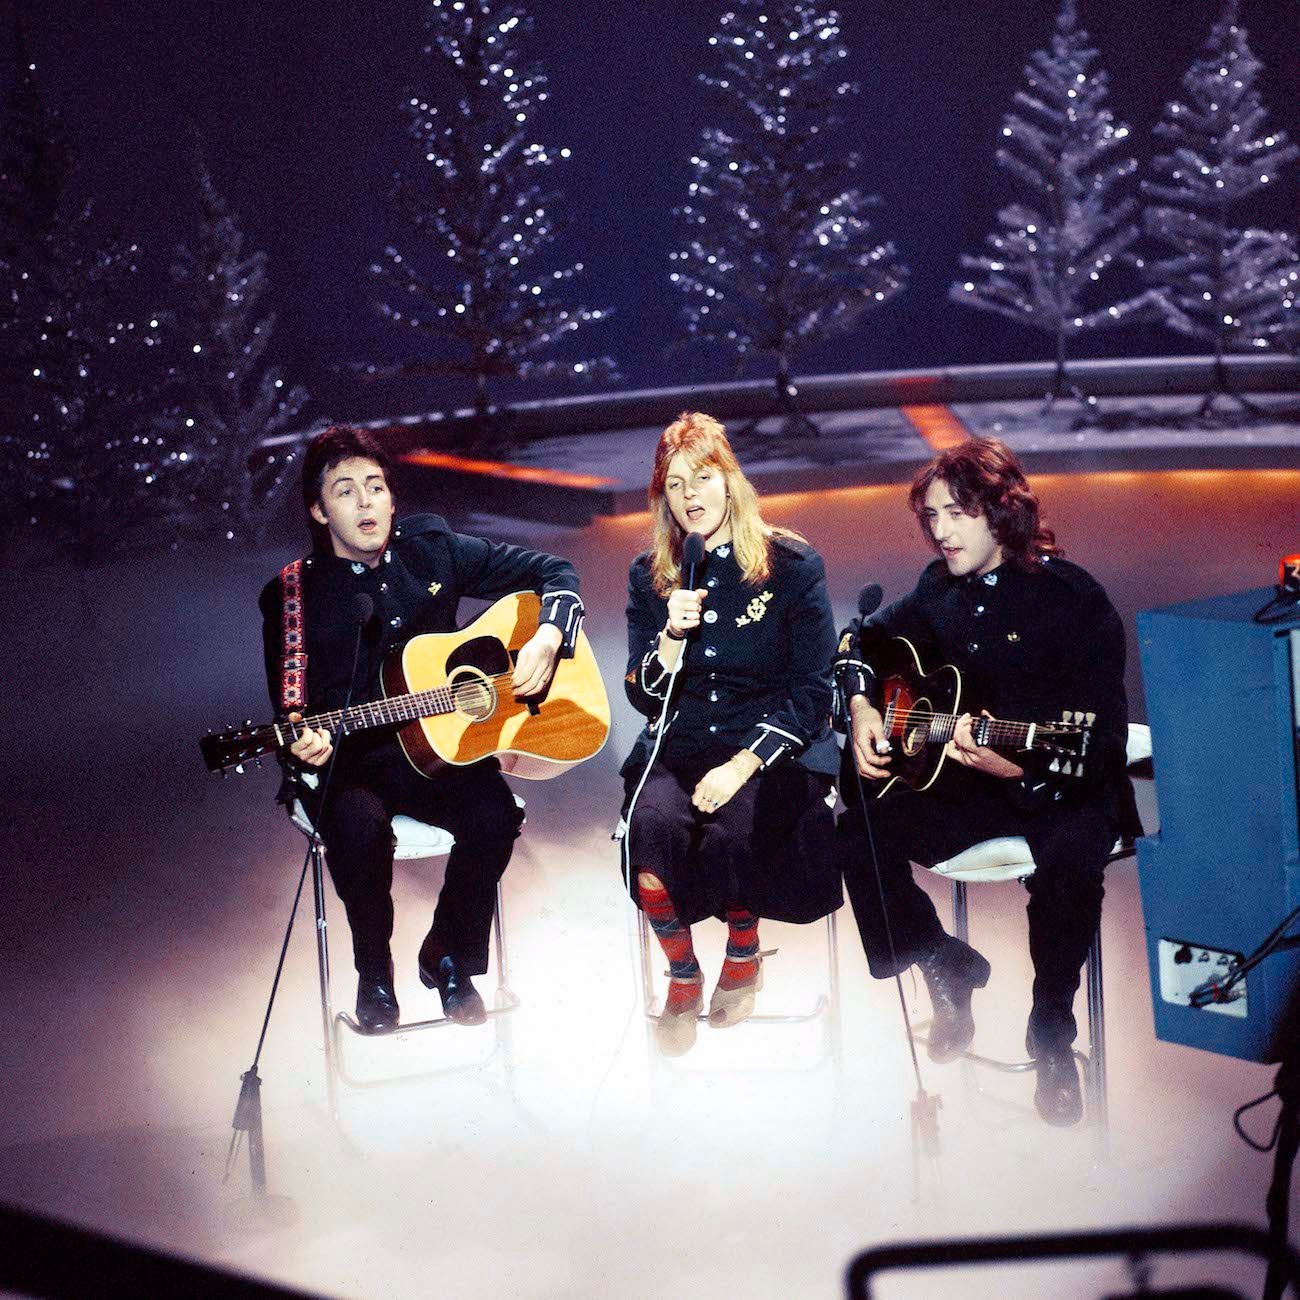 Paul McCartney and his wife, Linda McCartney, performing with Wings' Denny Laine during a BBC Christmas special in 1977.